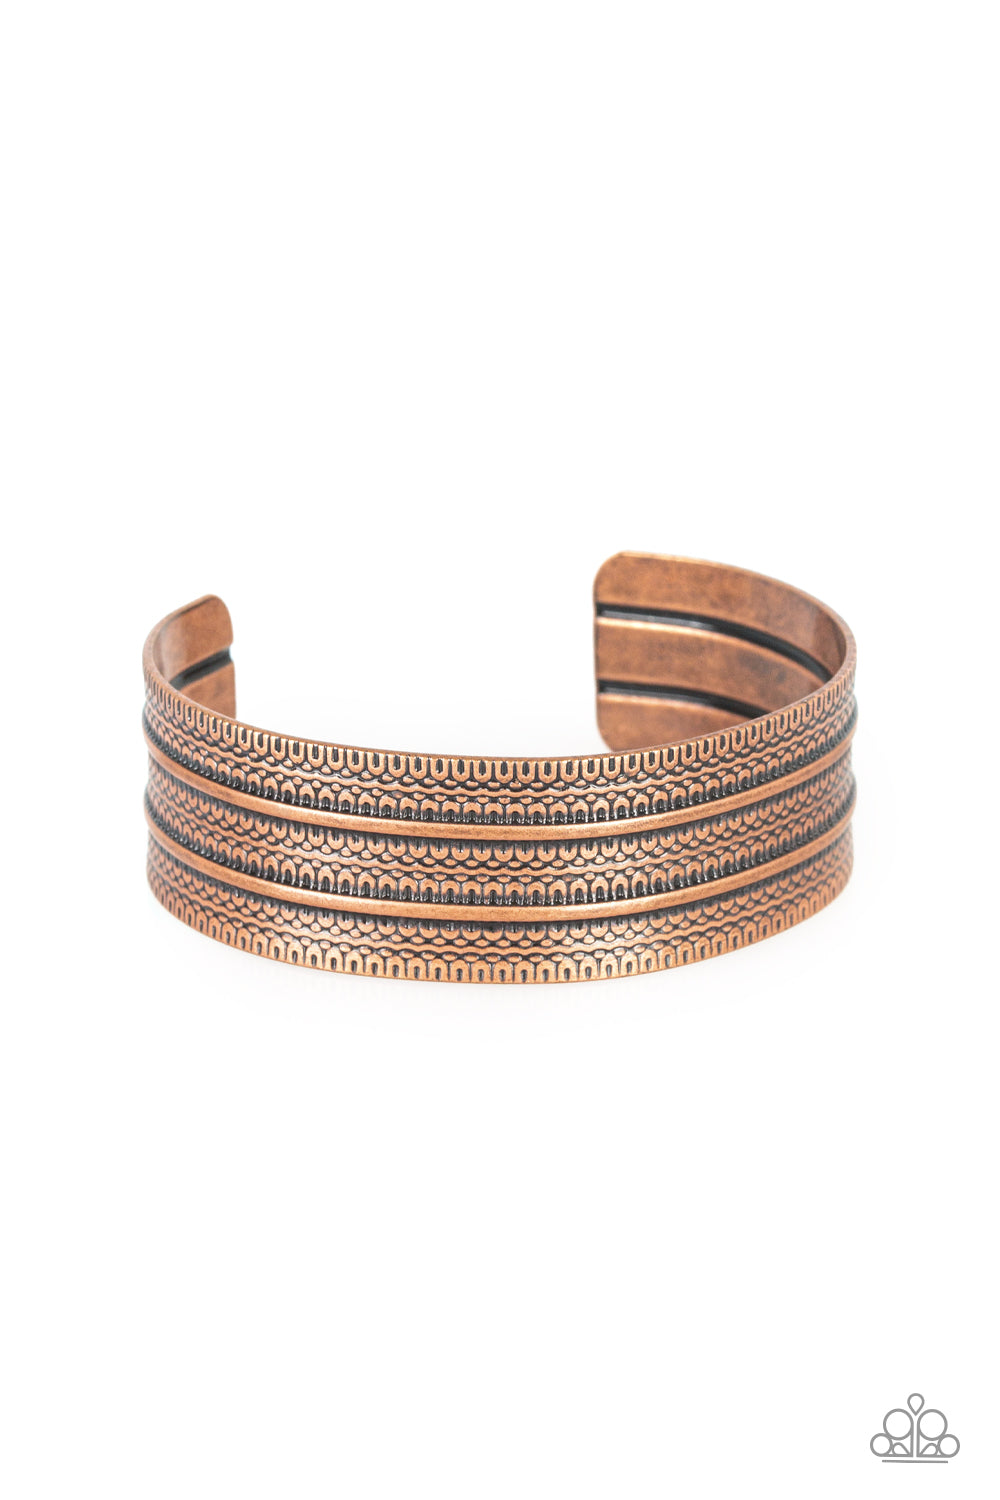 Absolute Amazon - Copper Cuff Bracelet - Paparazzi Accessories - 
Stamped in tribal-inspired patterns, an antiqued copper cuff wraps around the wrist for an indigenous look.
Sold as one individual bracelet.